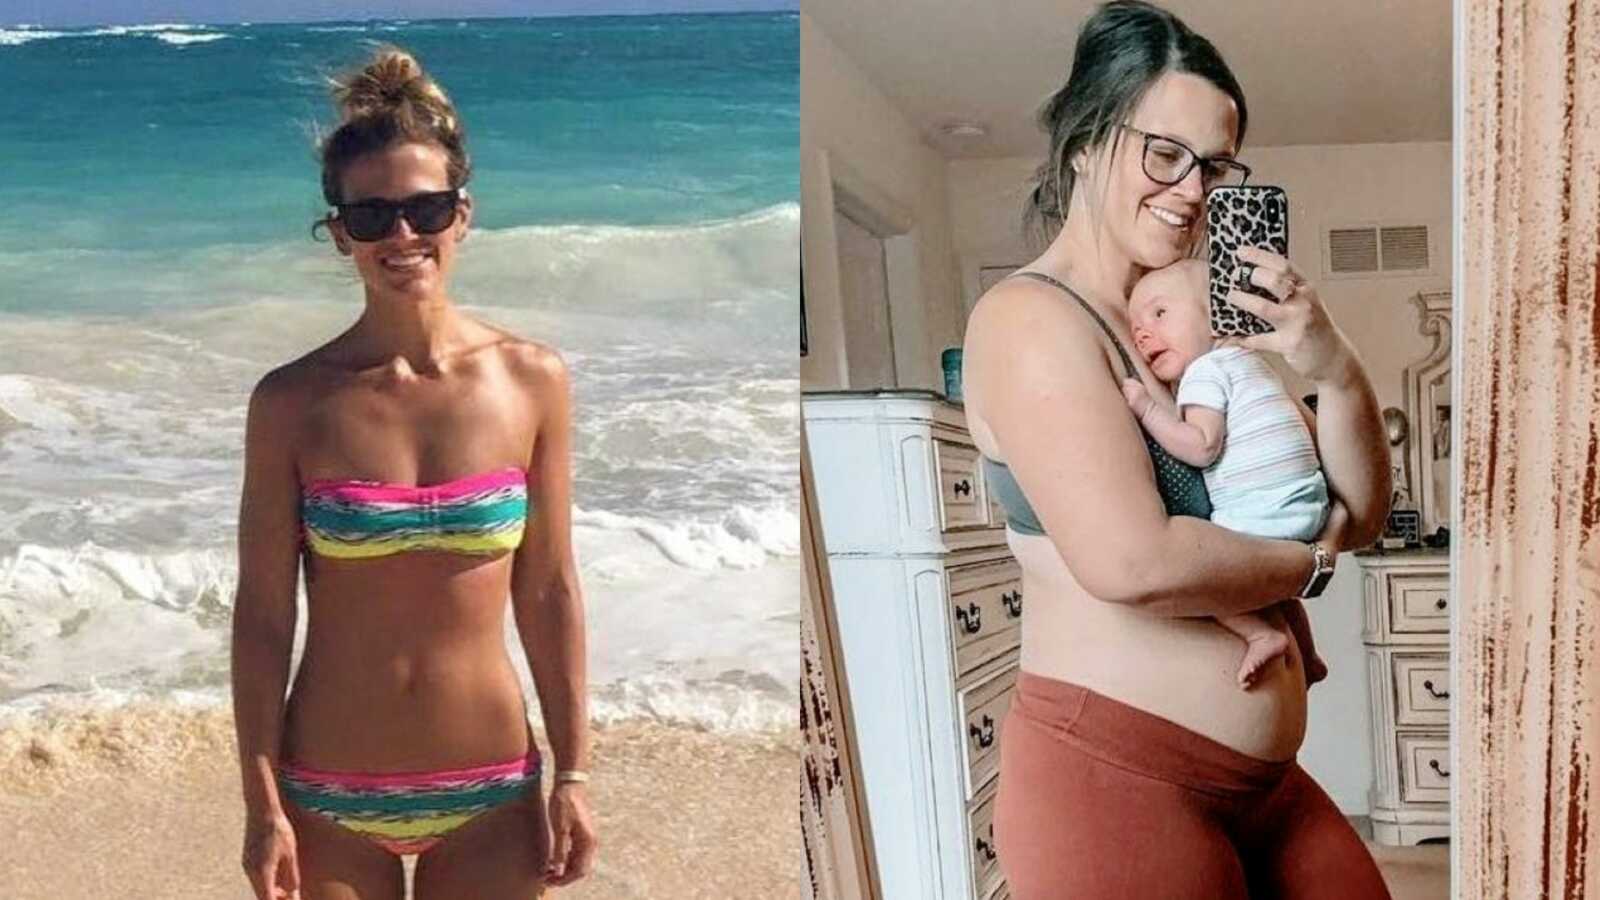 Mom of two shows before and after photos of before having kids and postpartum